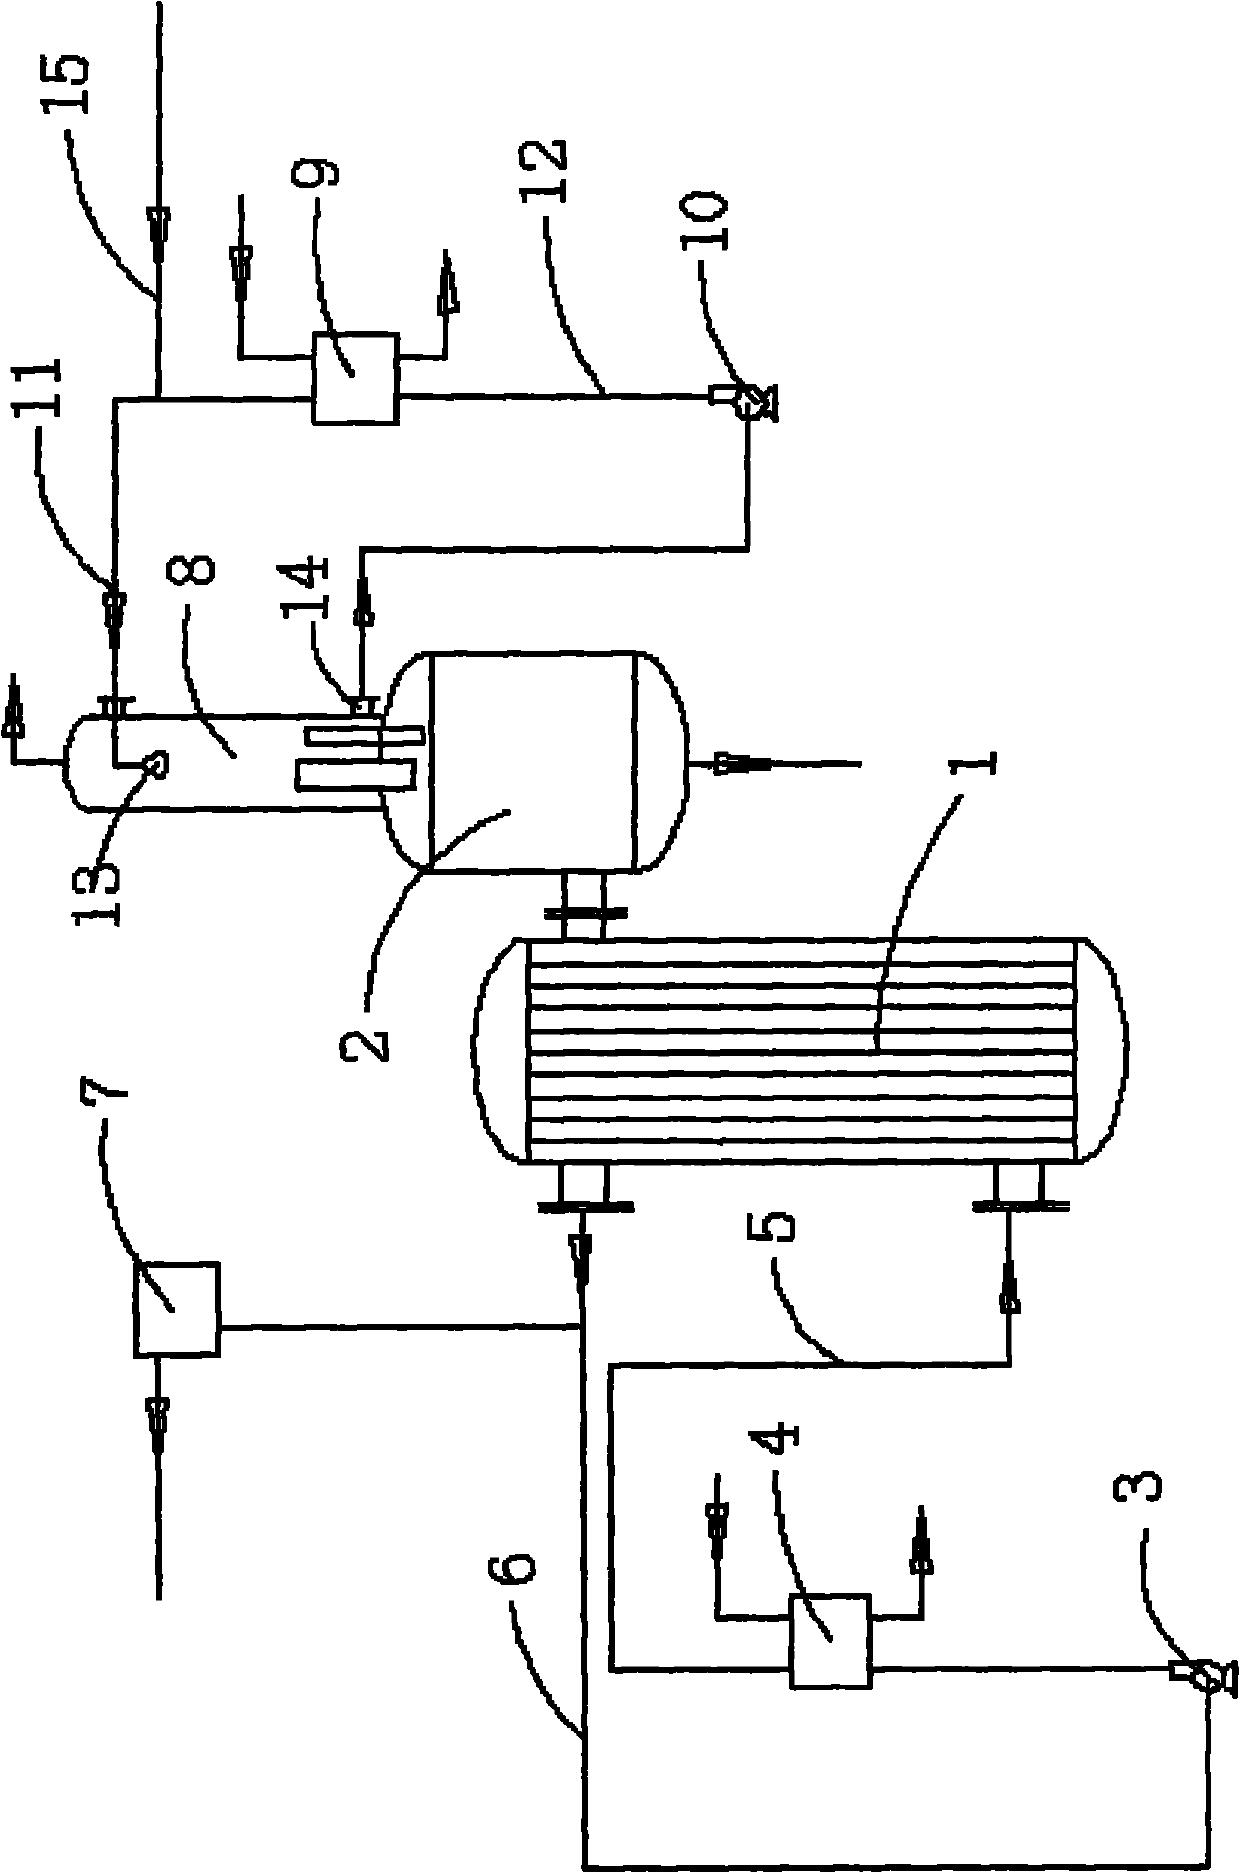 Improved device of low-pressure system of carbon dioxide air stripping urea device